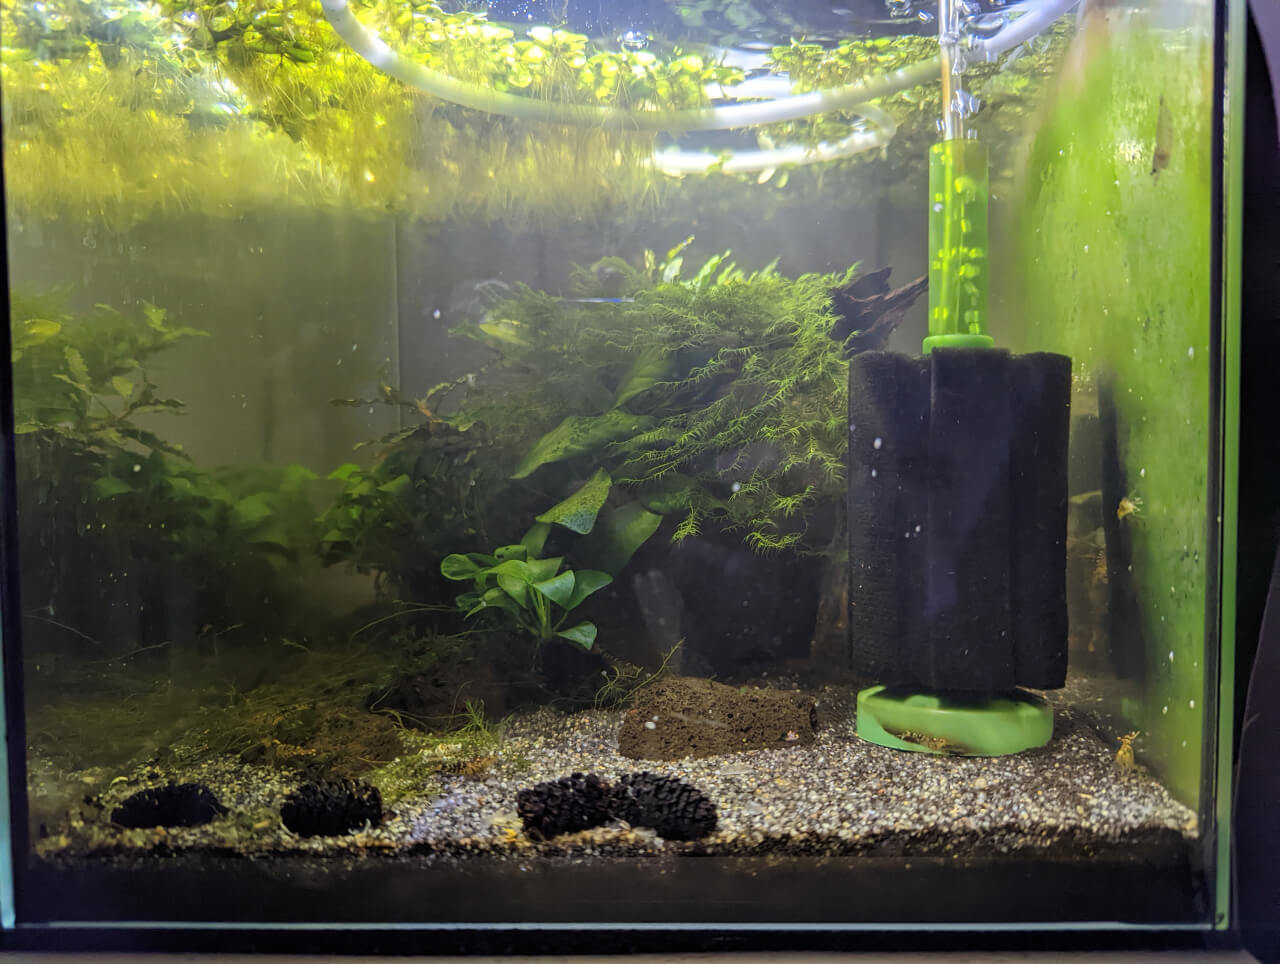 Clean shrimp tank water after cleaning